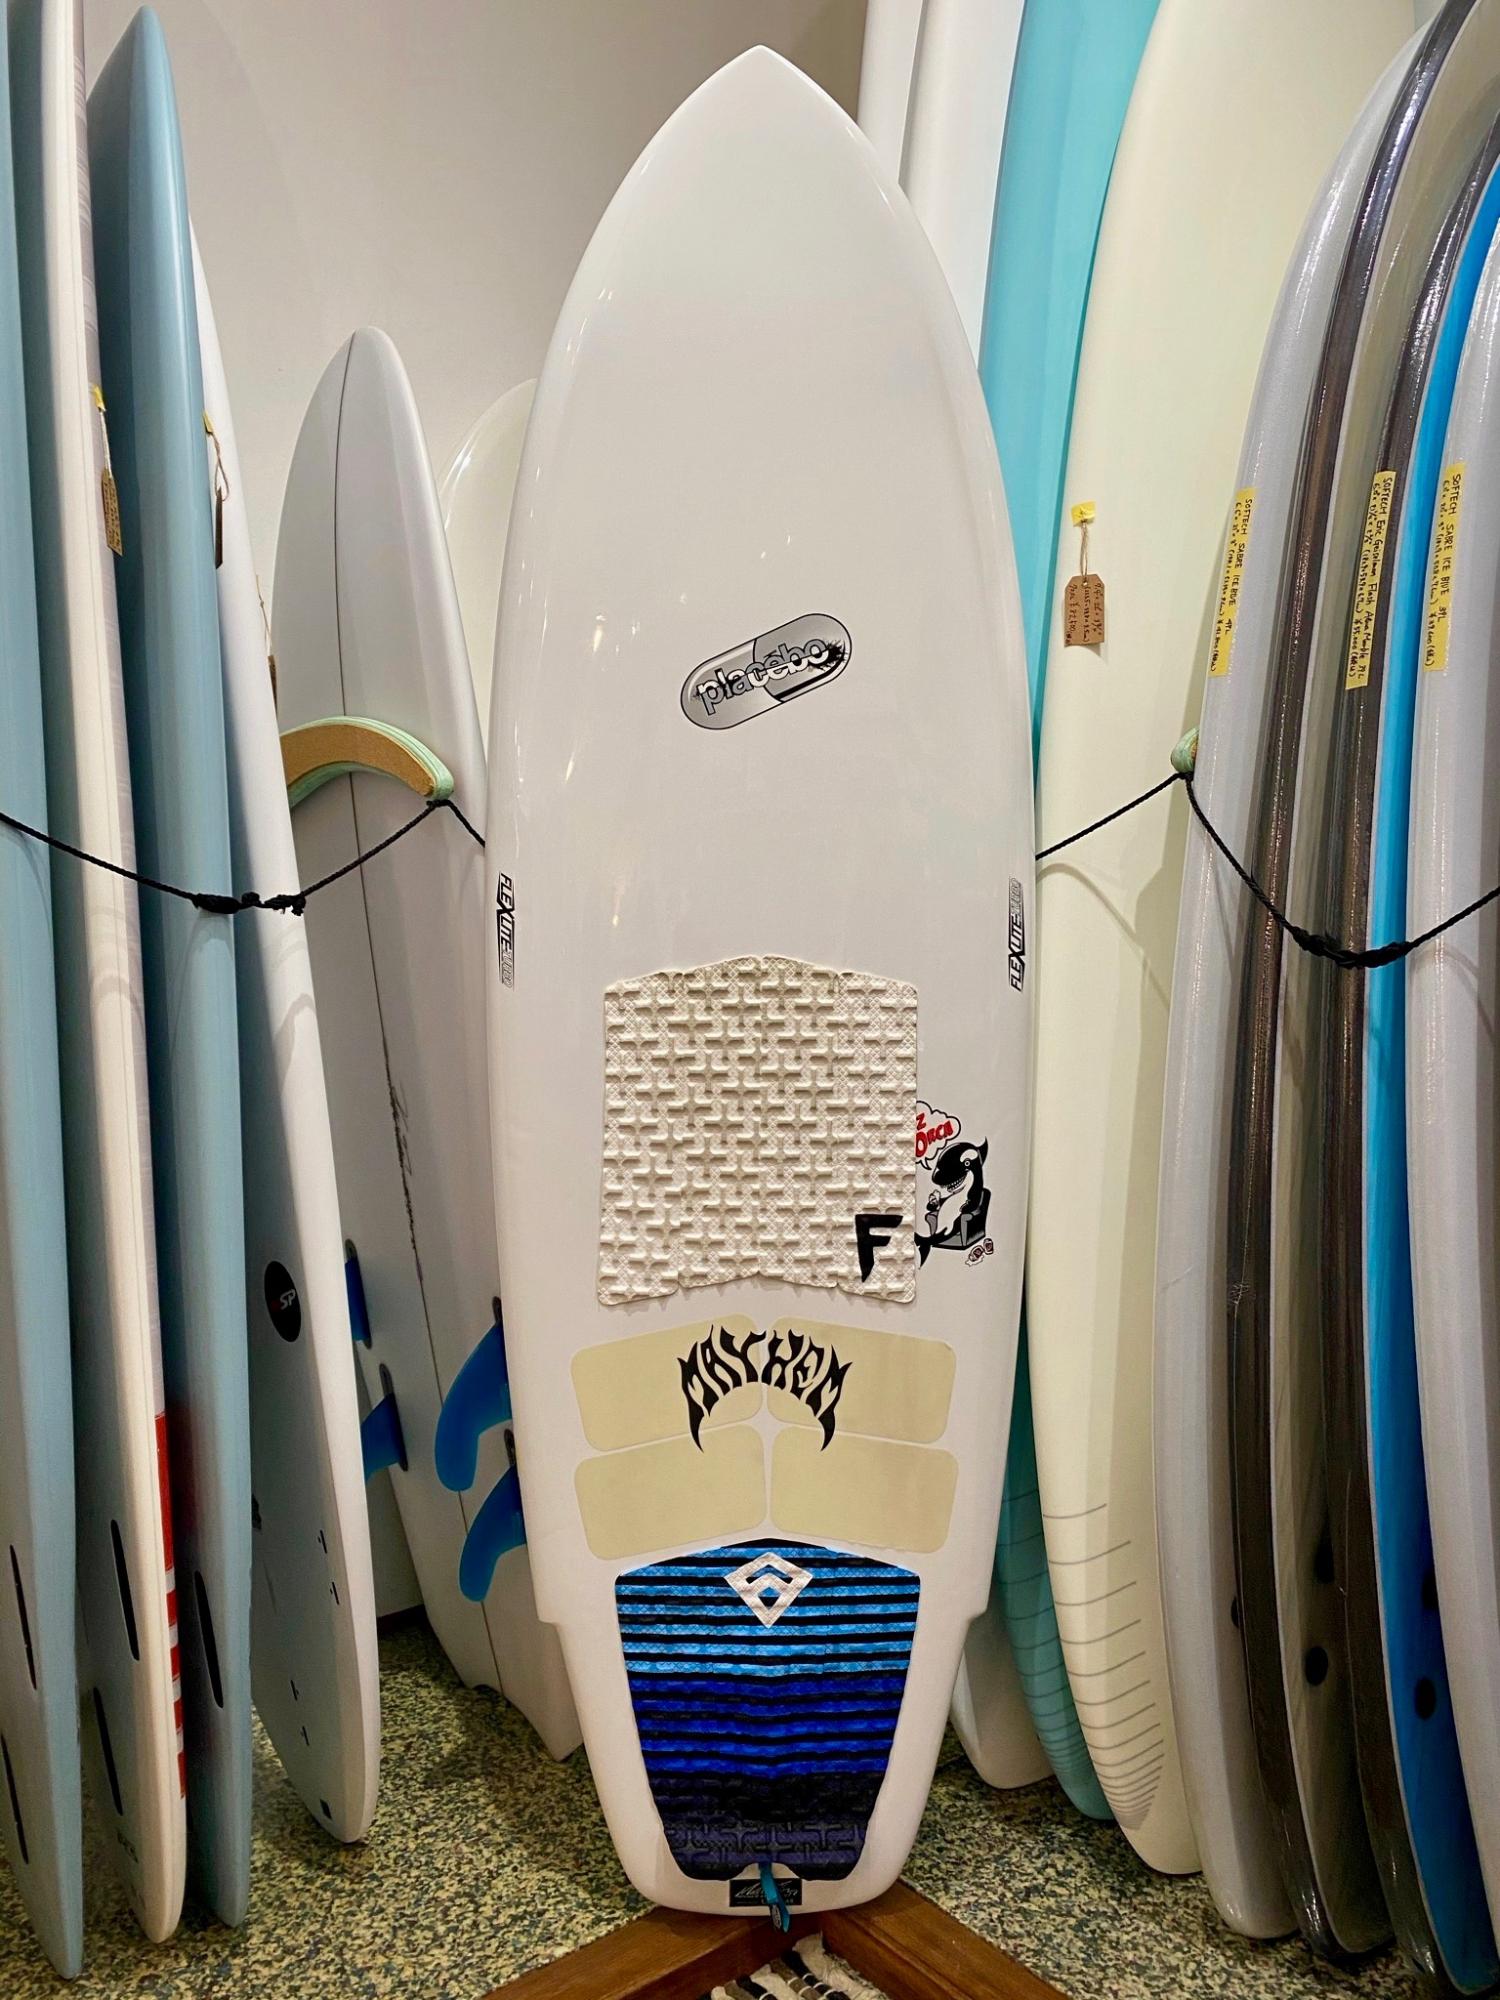 USED SURF BOARDS (PLACEBO LAYZ ORCA 6.0 )